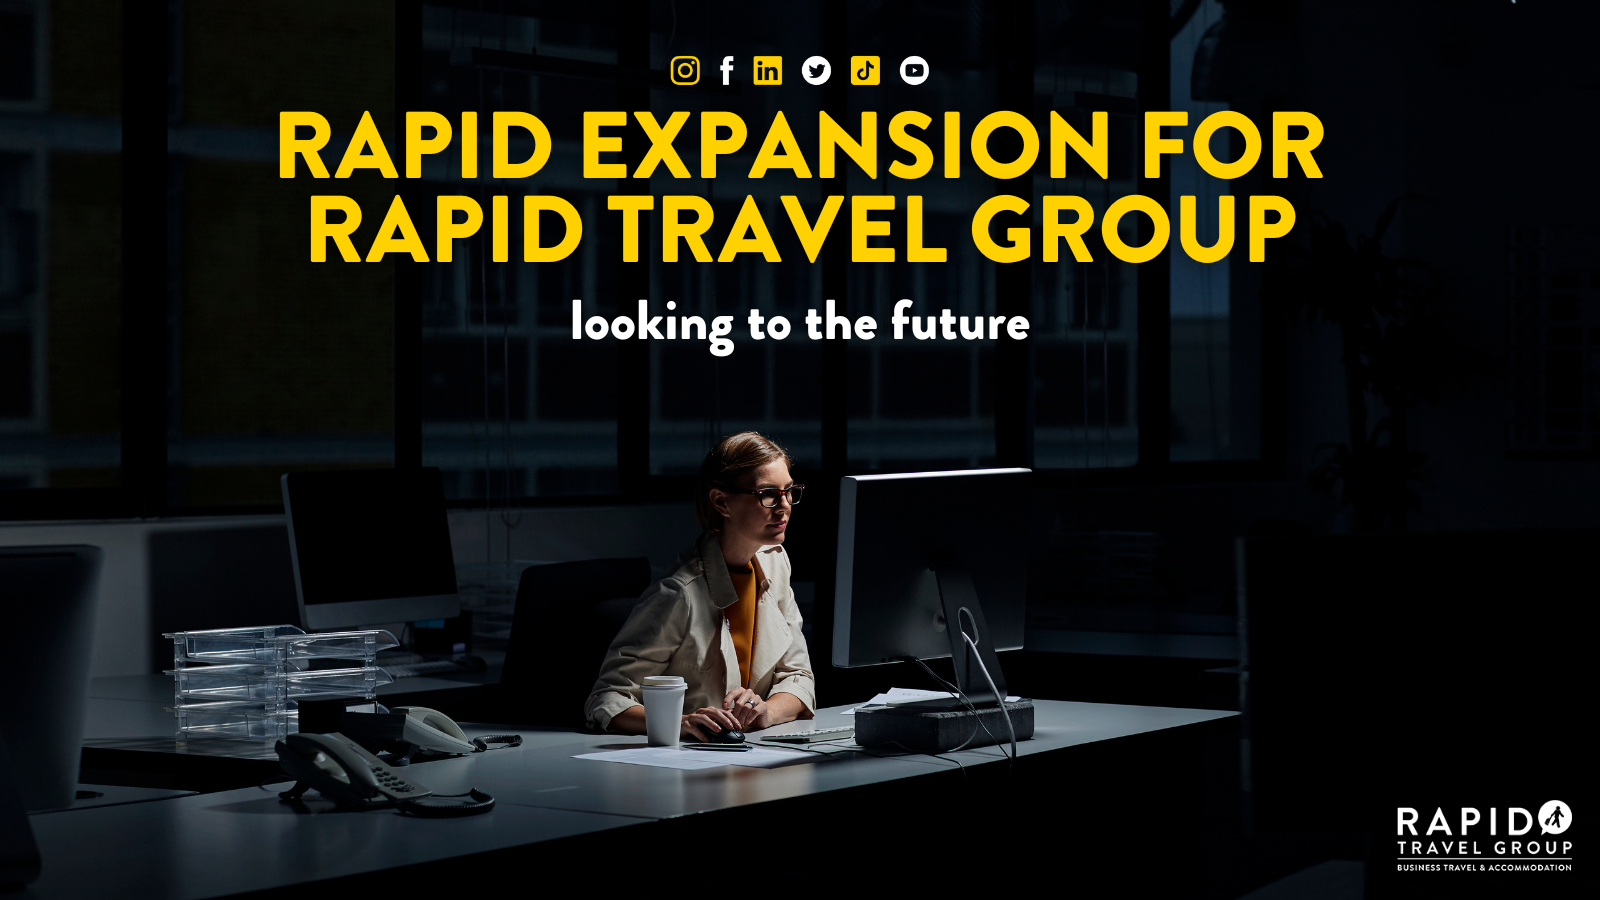 Rapid expansion for Rapid travel group